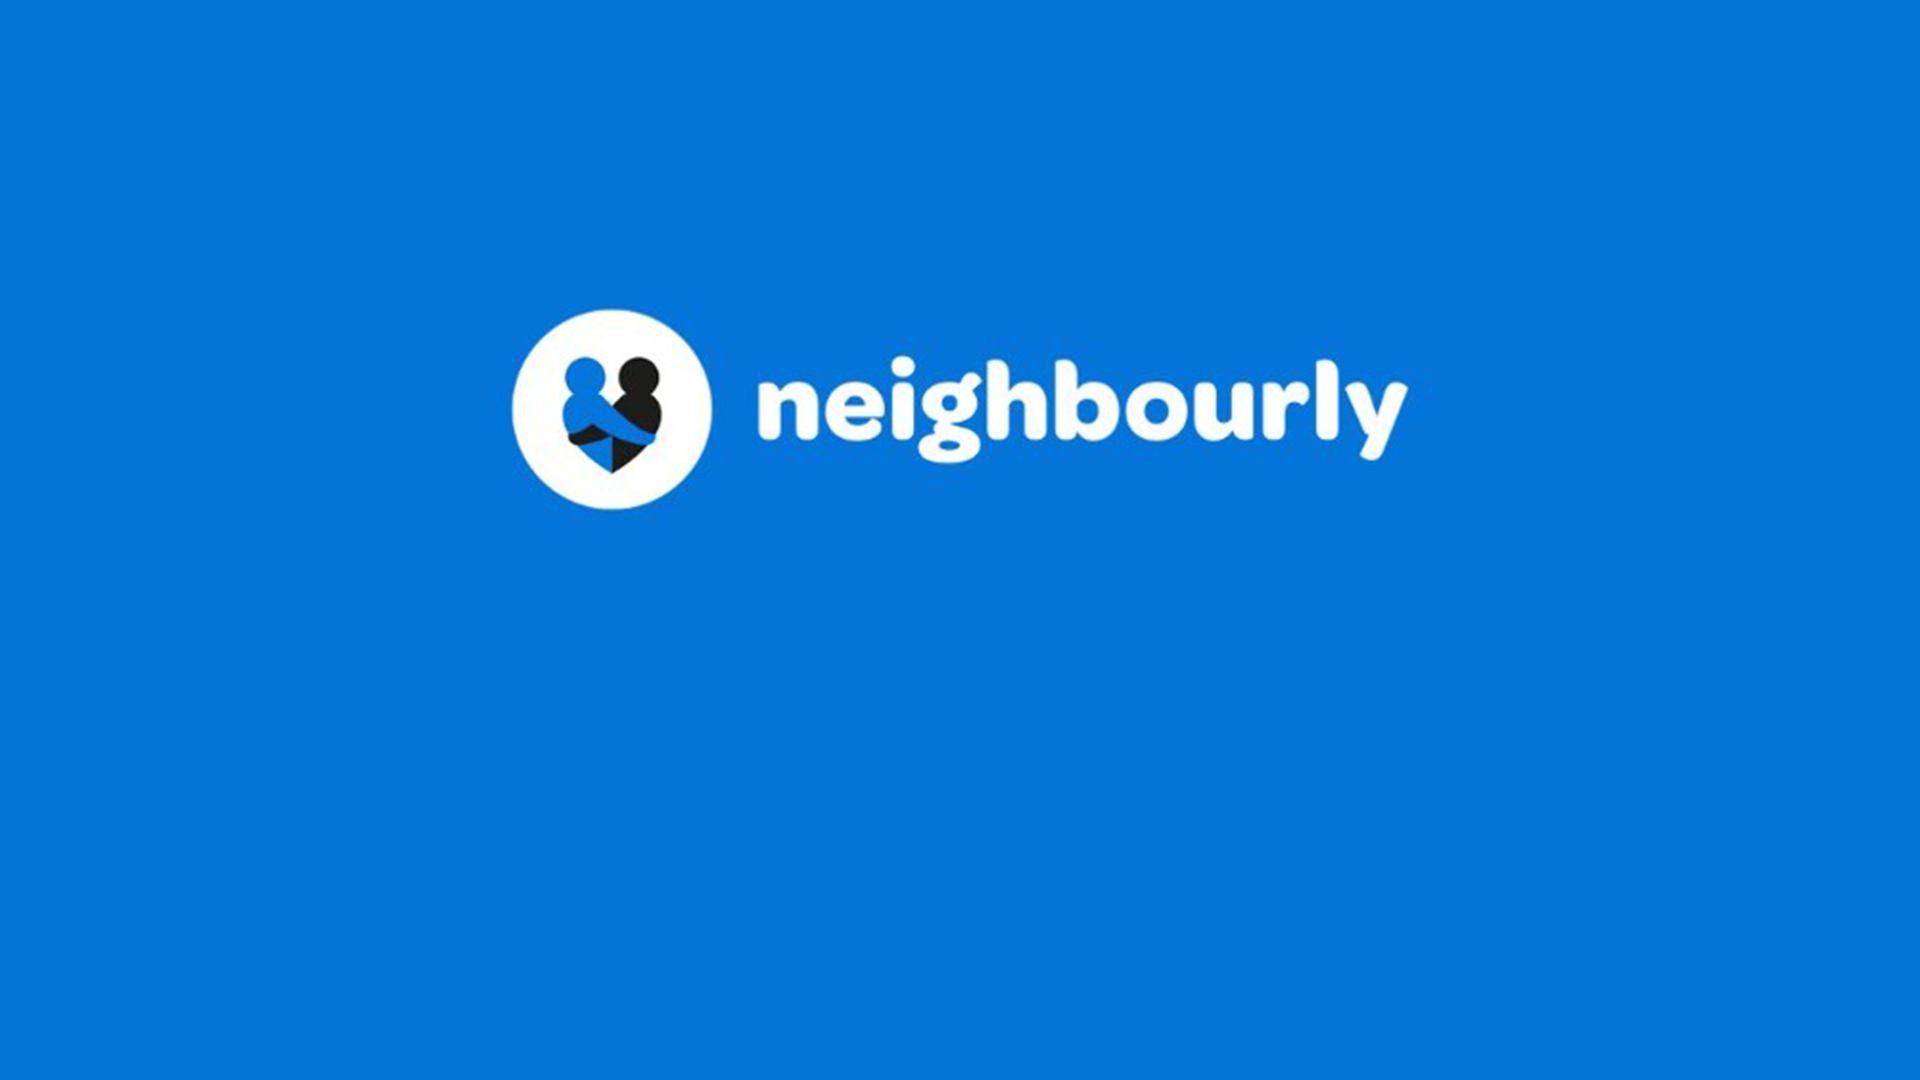 We have partnered with Neighbourly to deliver our new volunteering programme